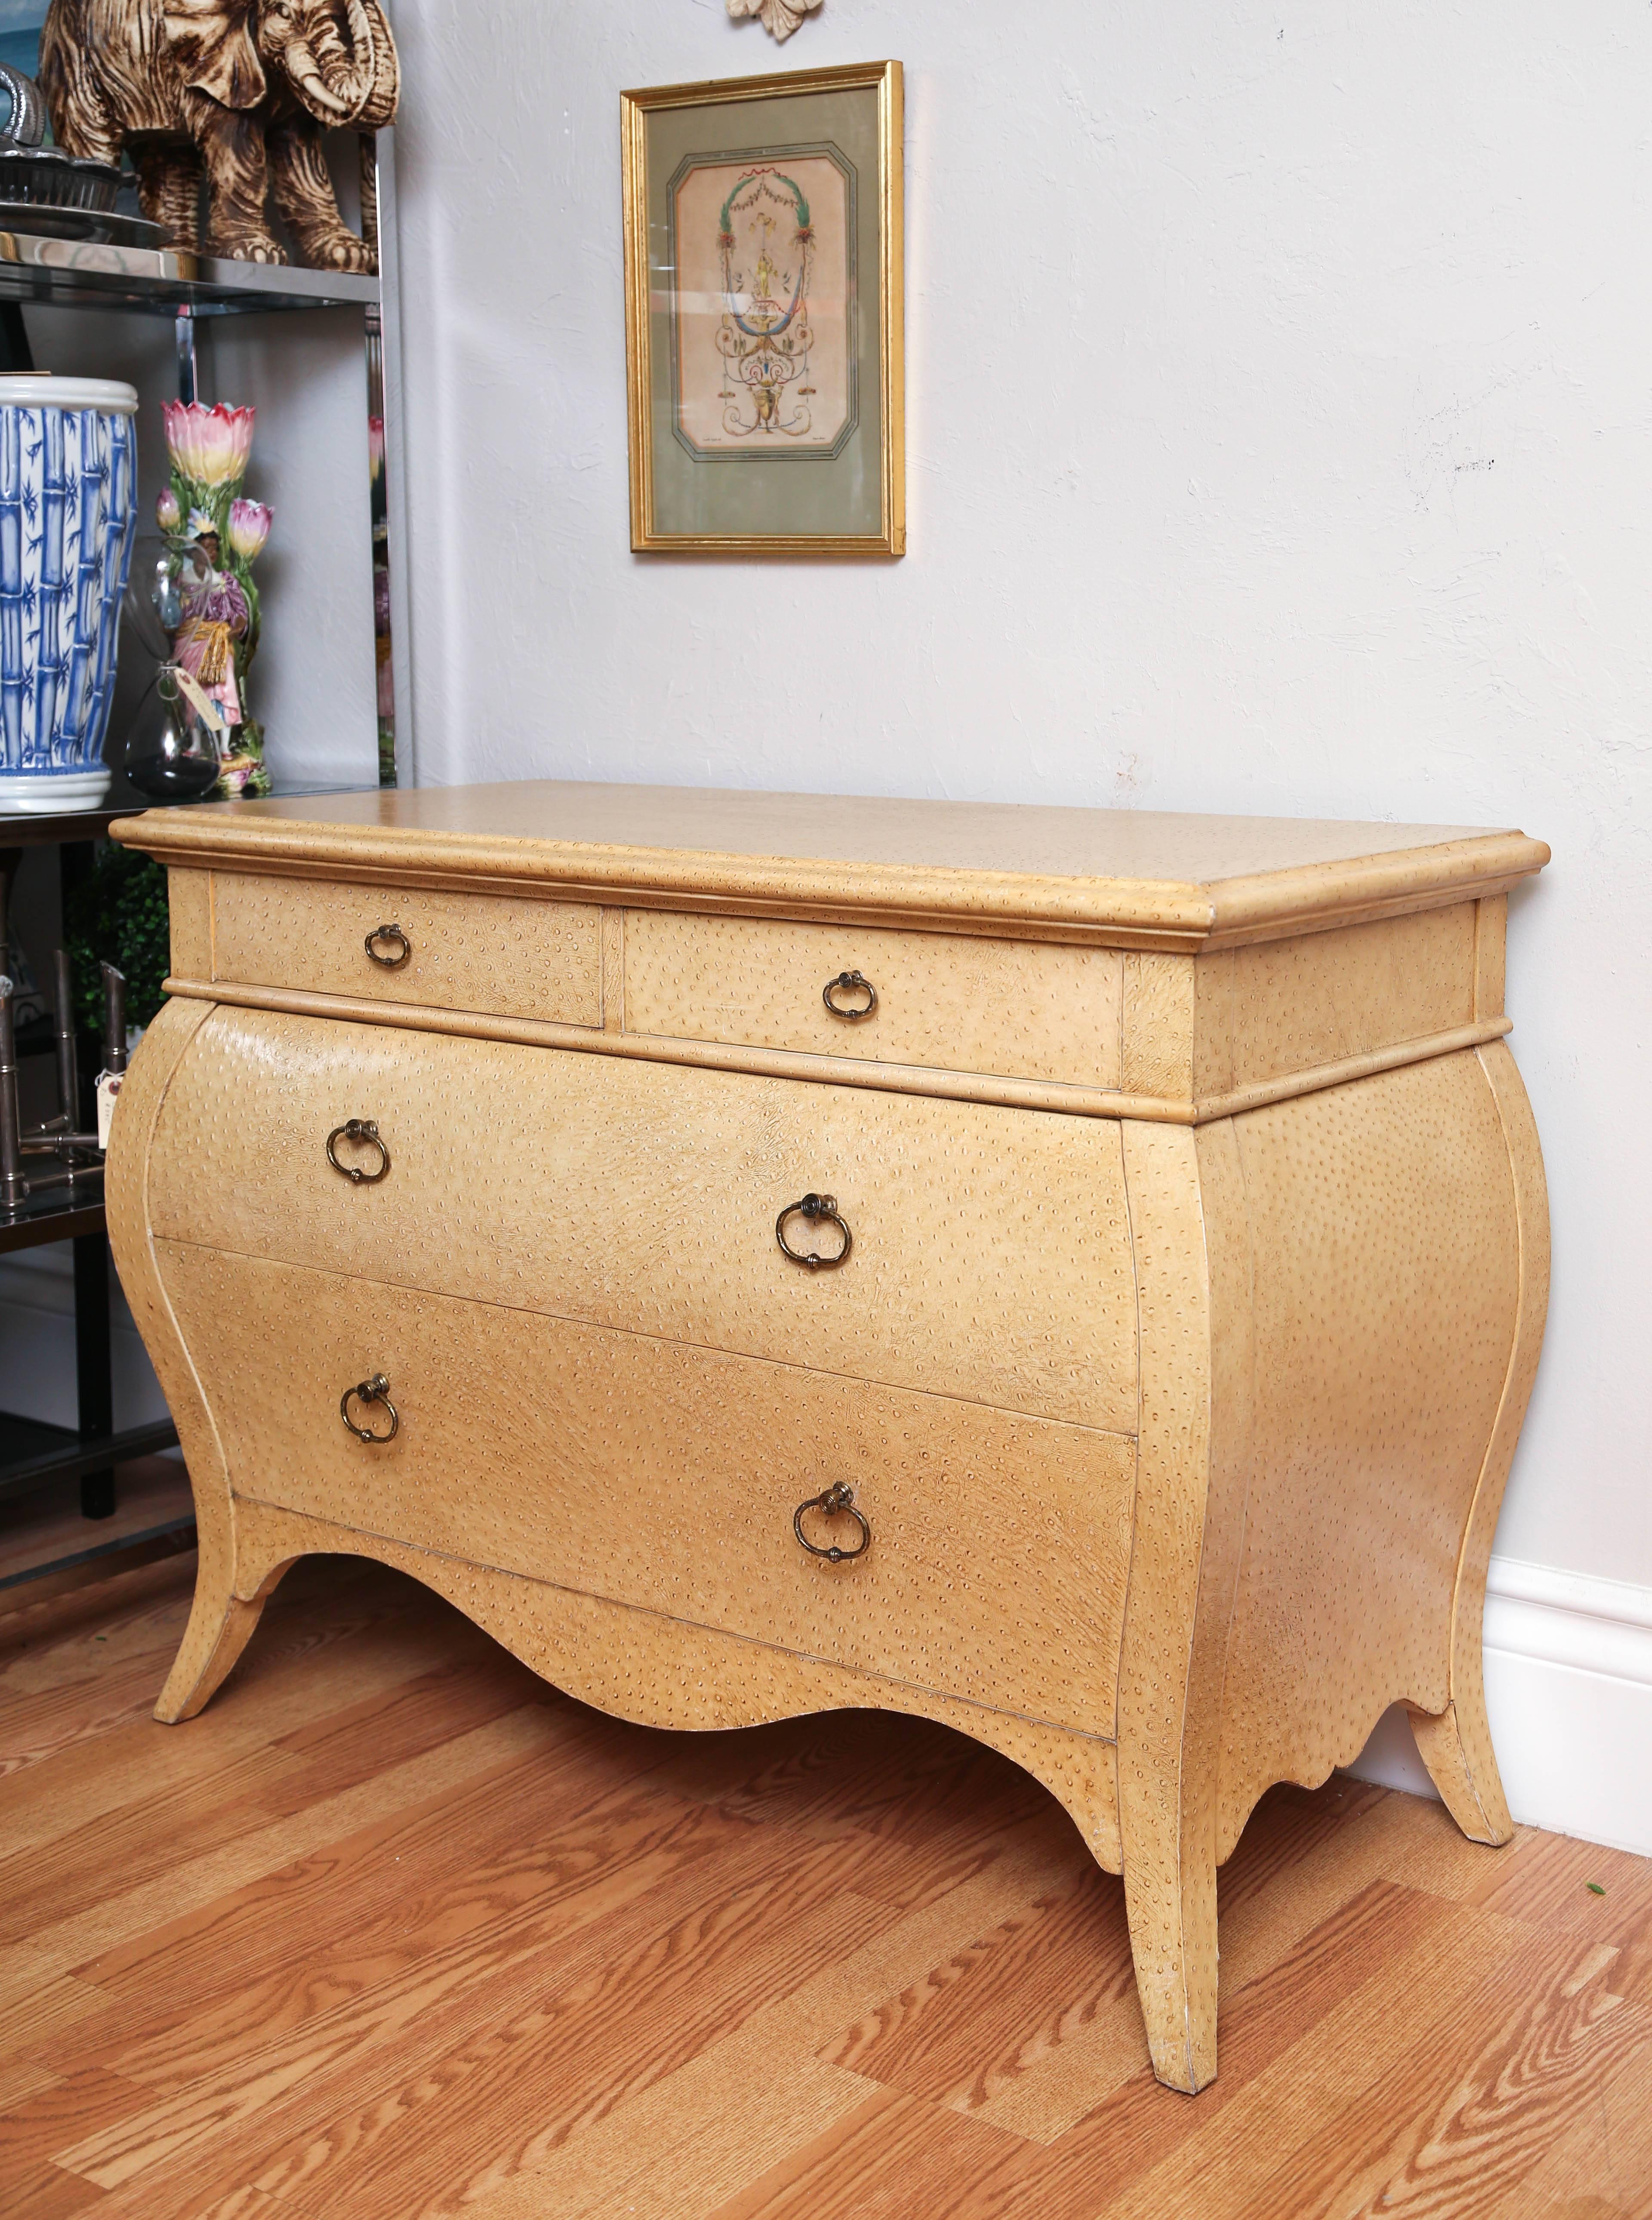 Striking four-drawer Bombay commode covered in faux ostrich skin with brass pulls.